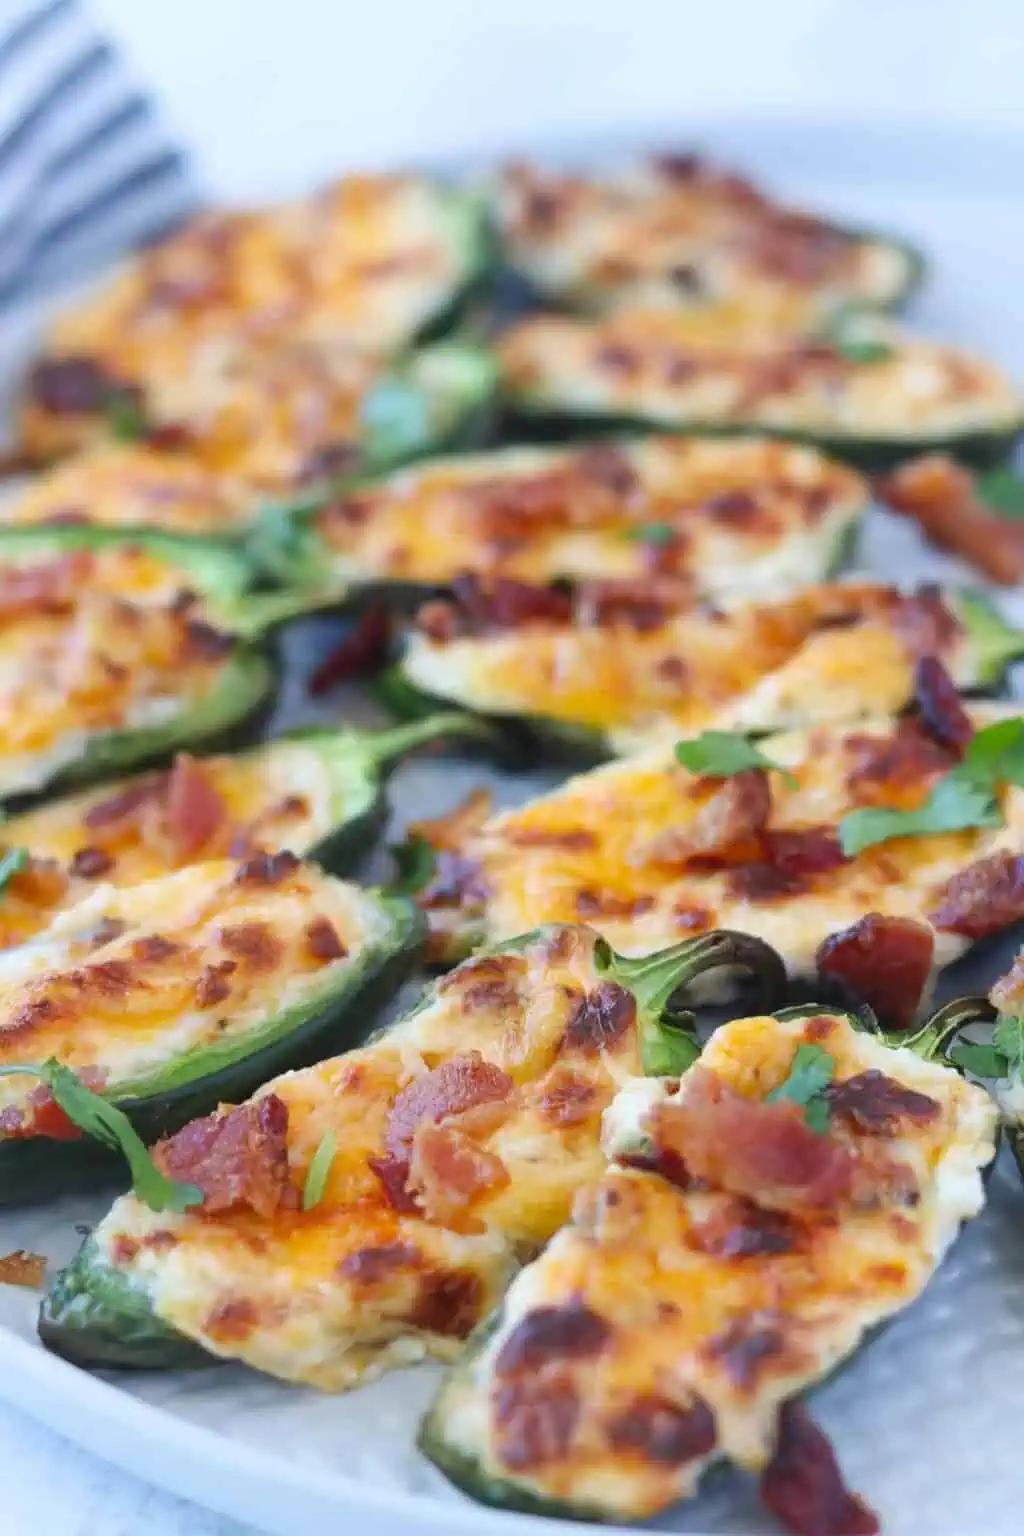 cream cheese jalapeno poppers